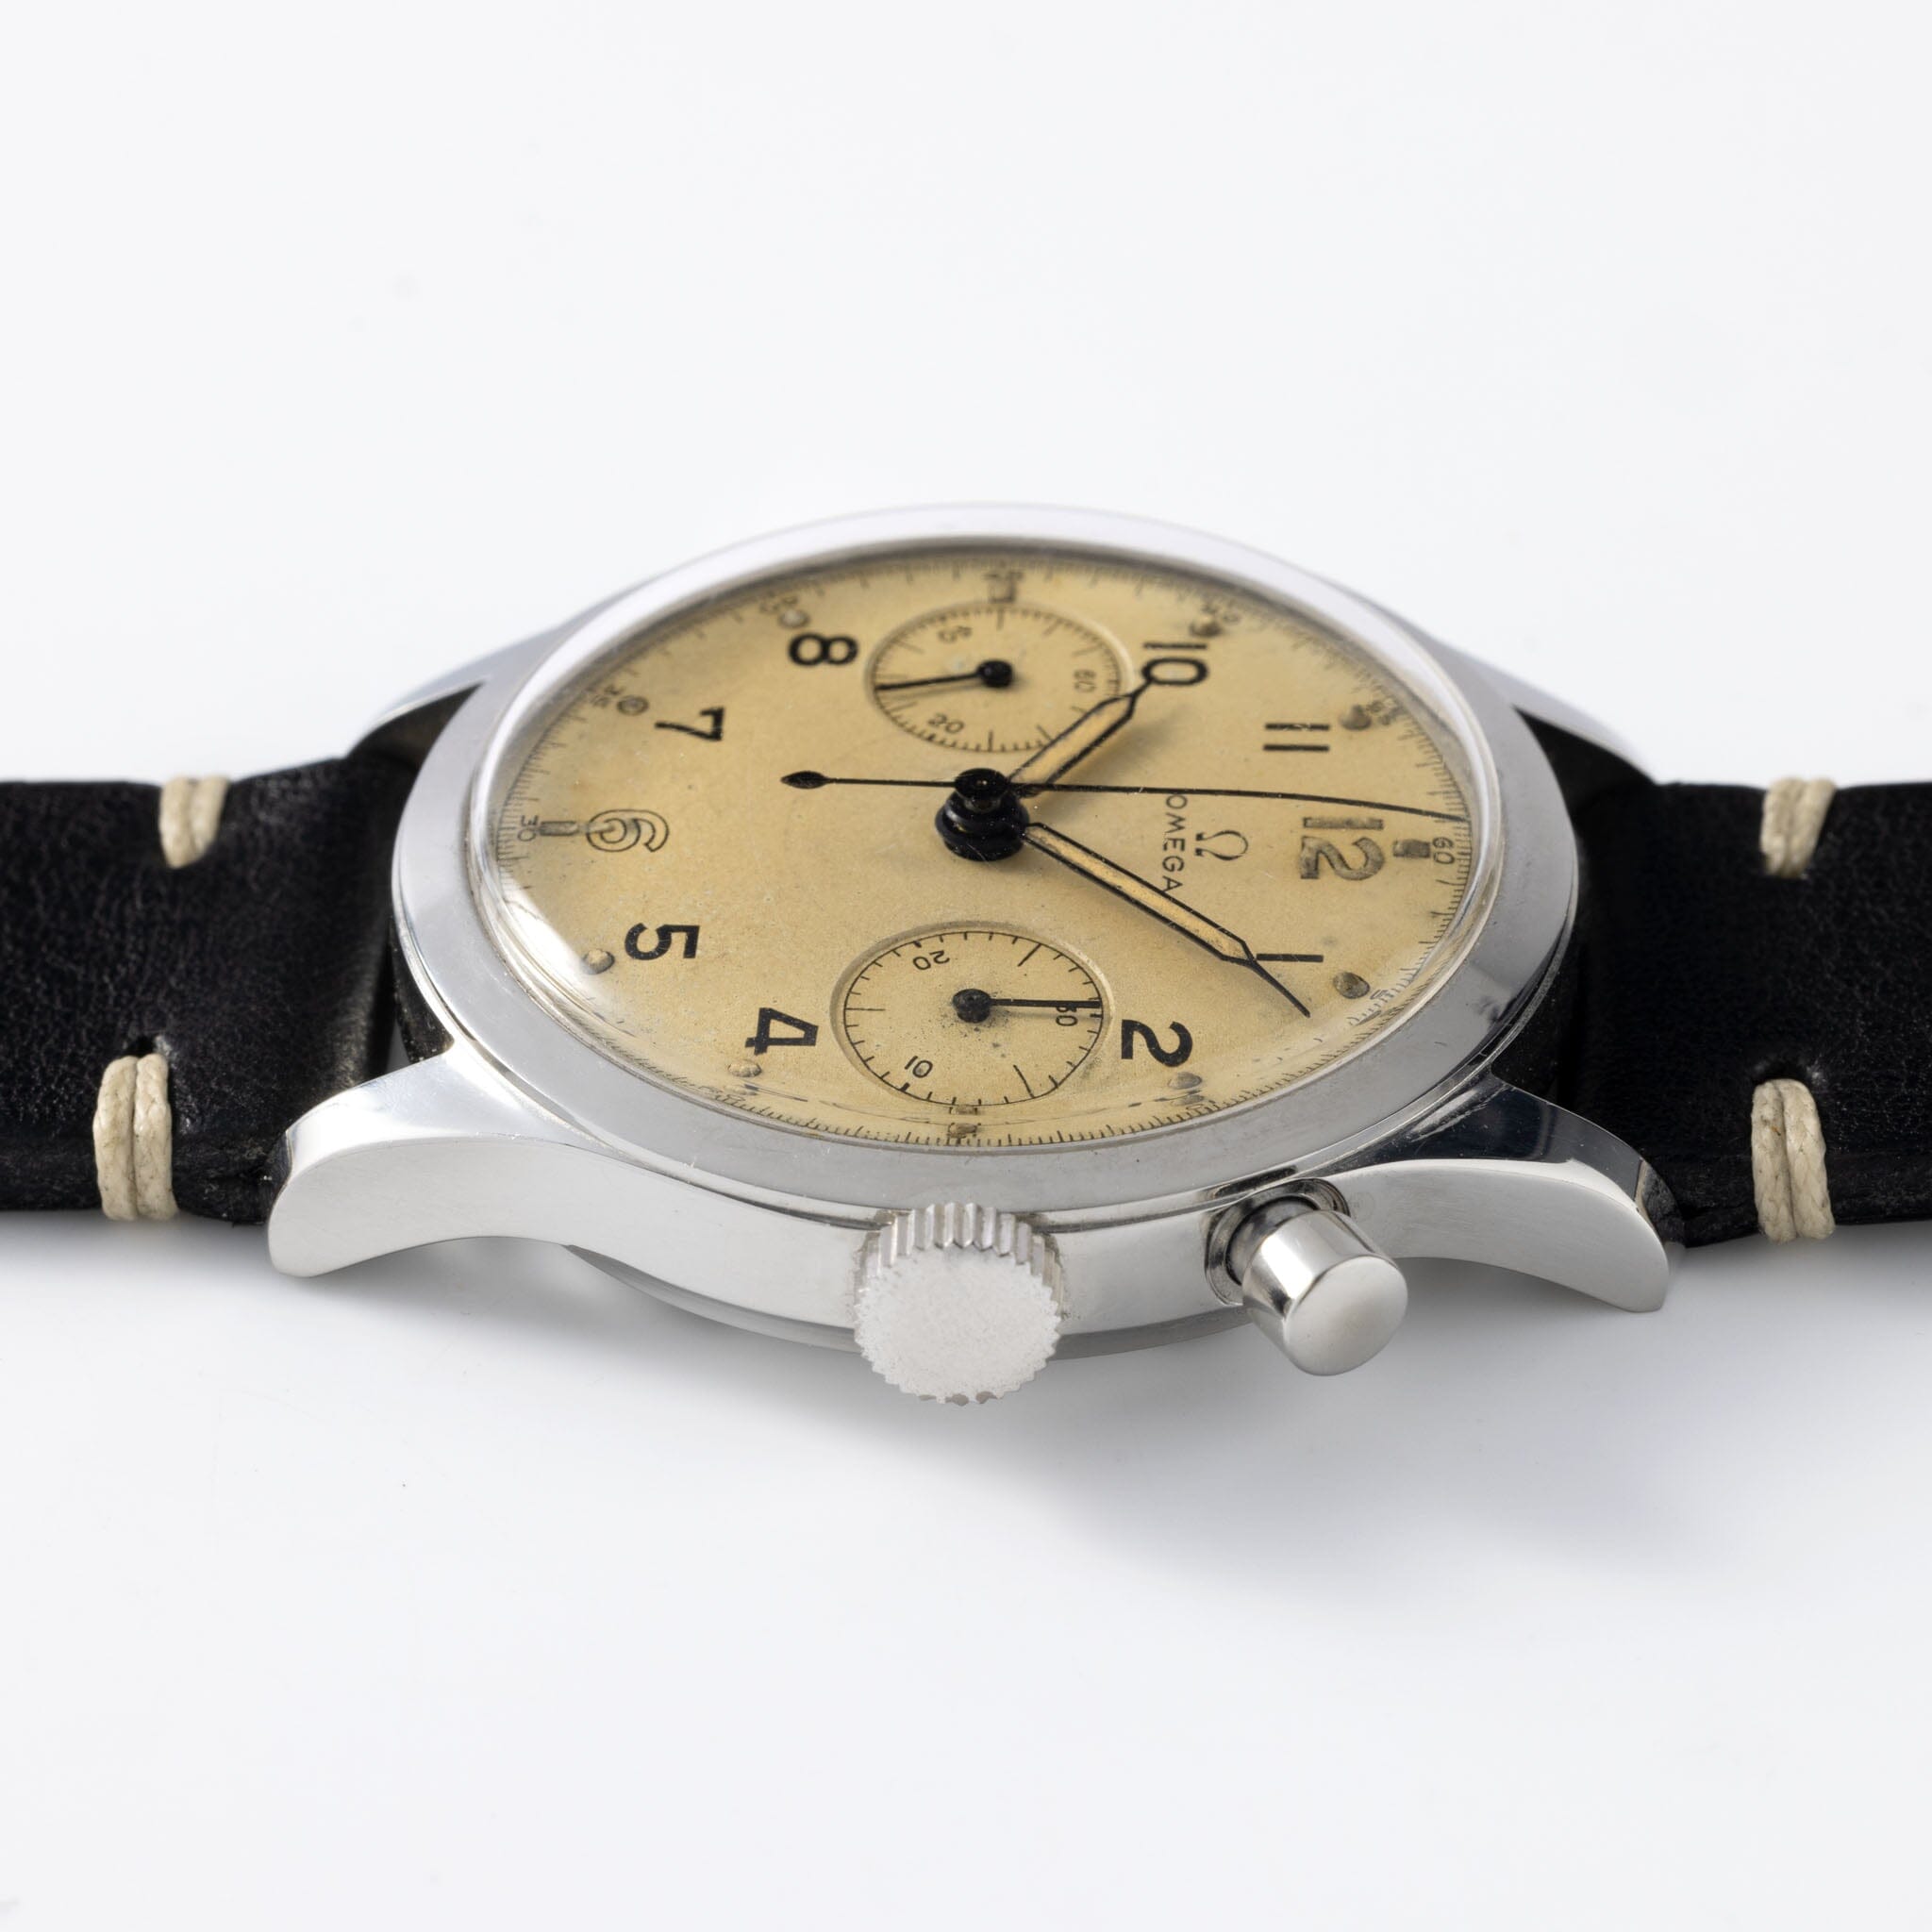 Omega Monopusher ref 6W/16 Chronograph issued to the Canadian Airforce